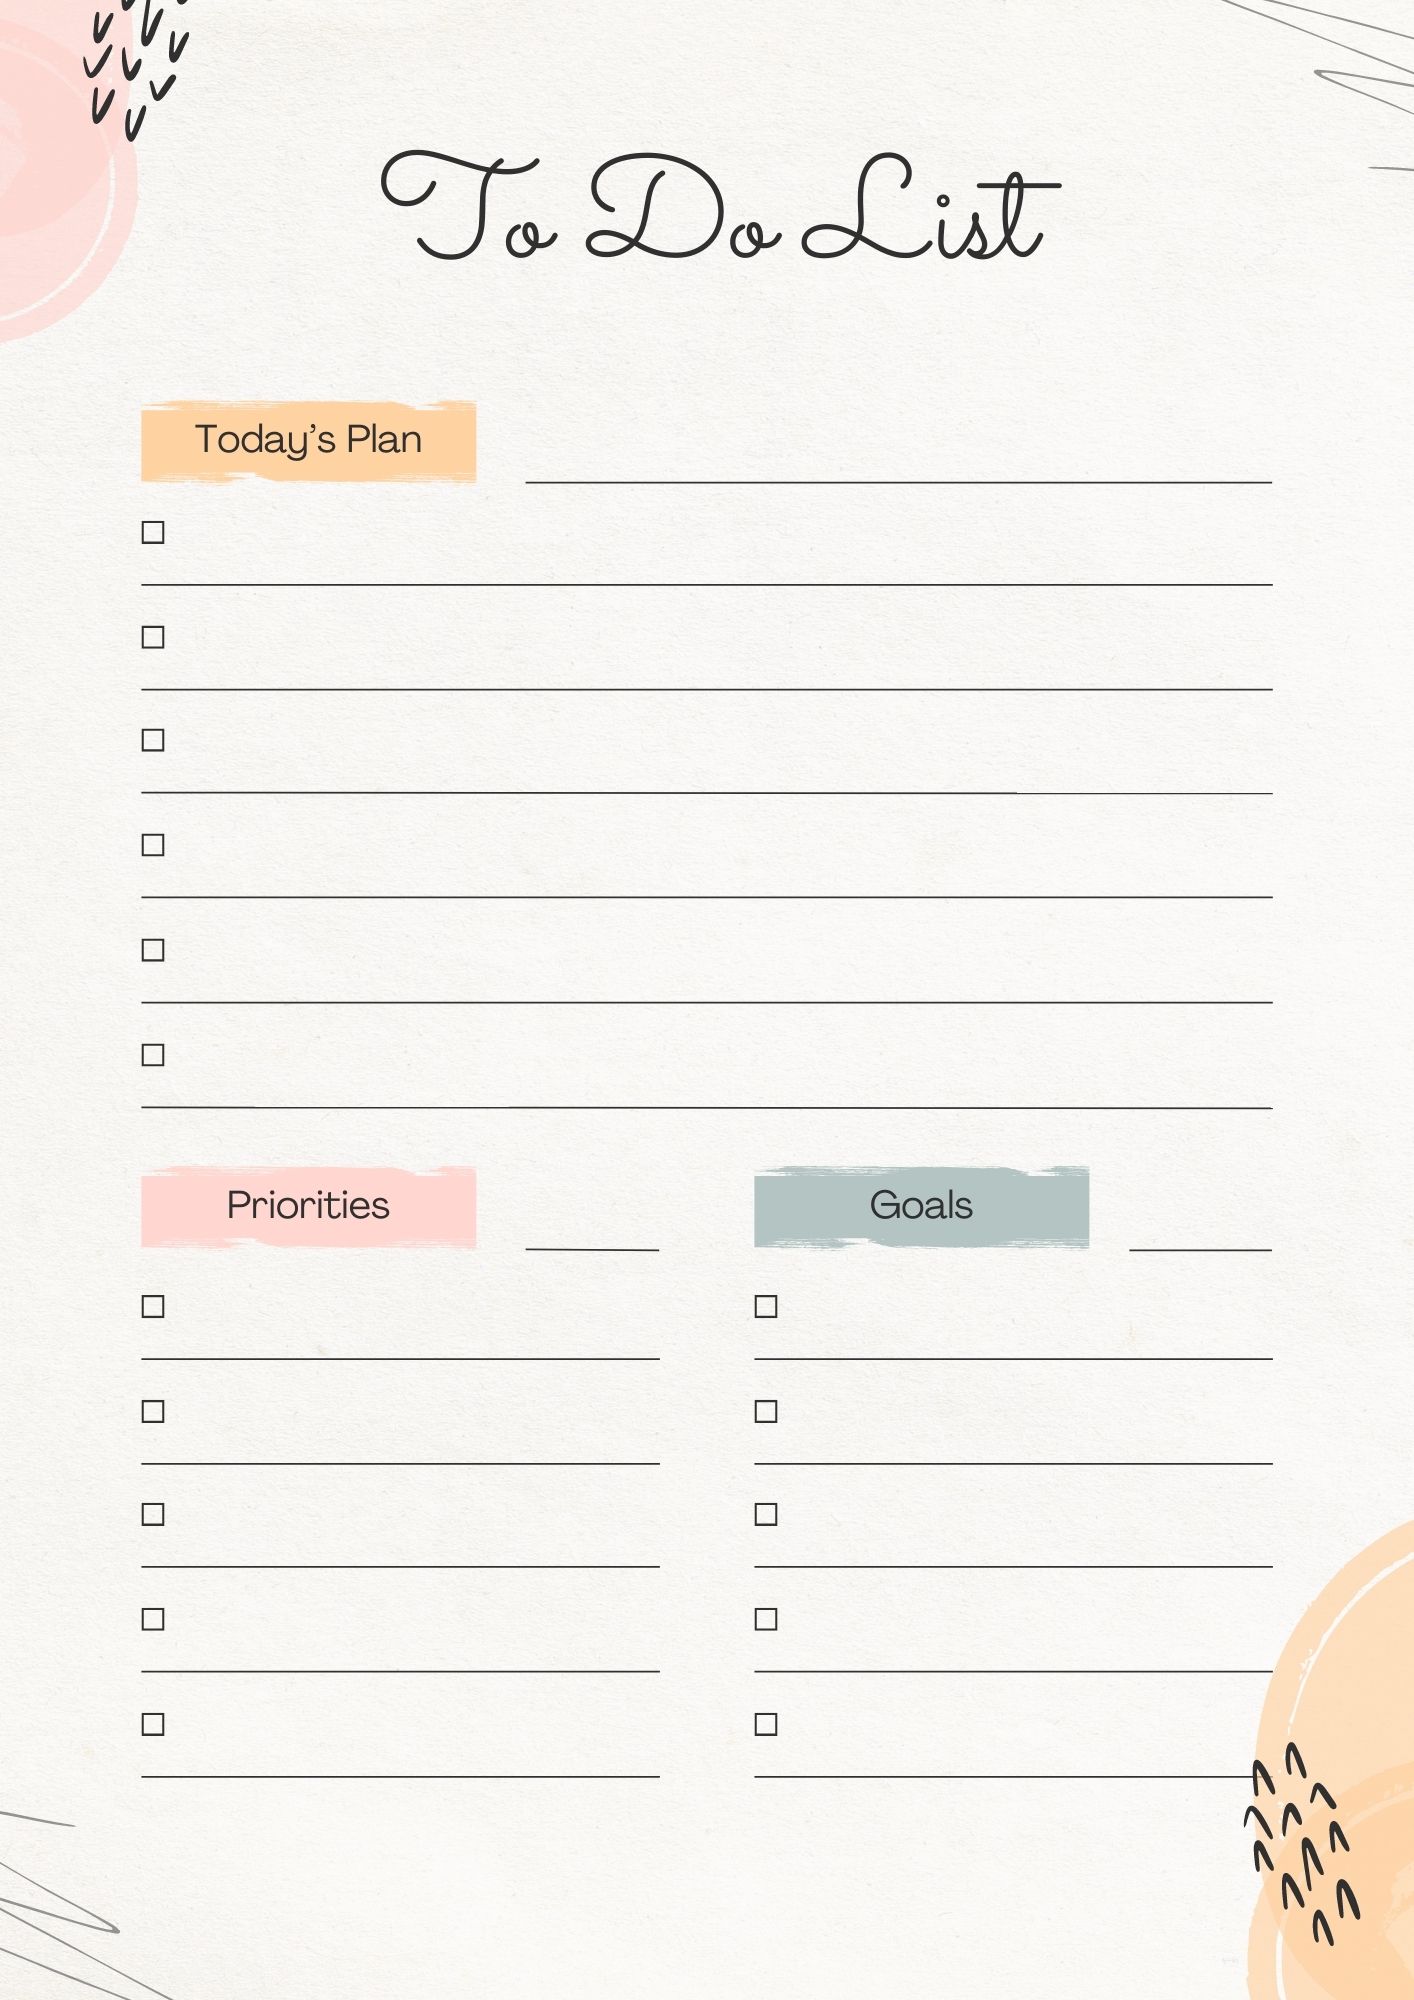 to do list made with canva